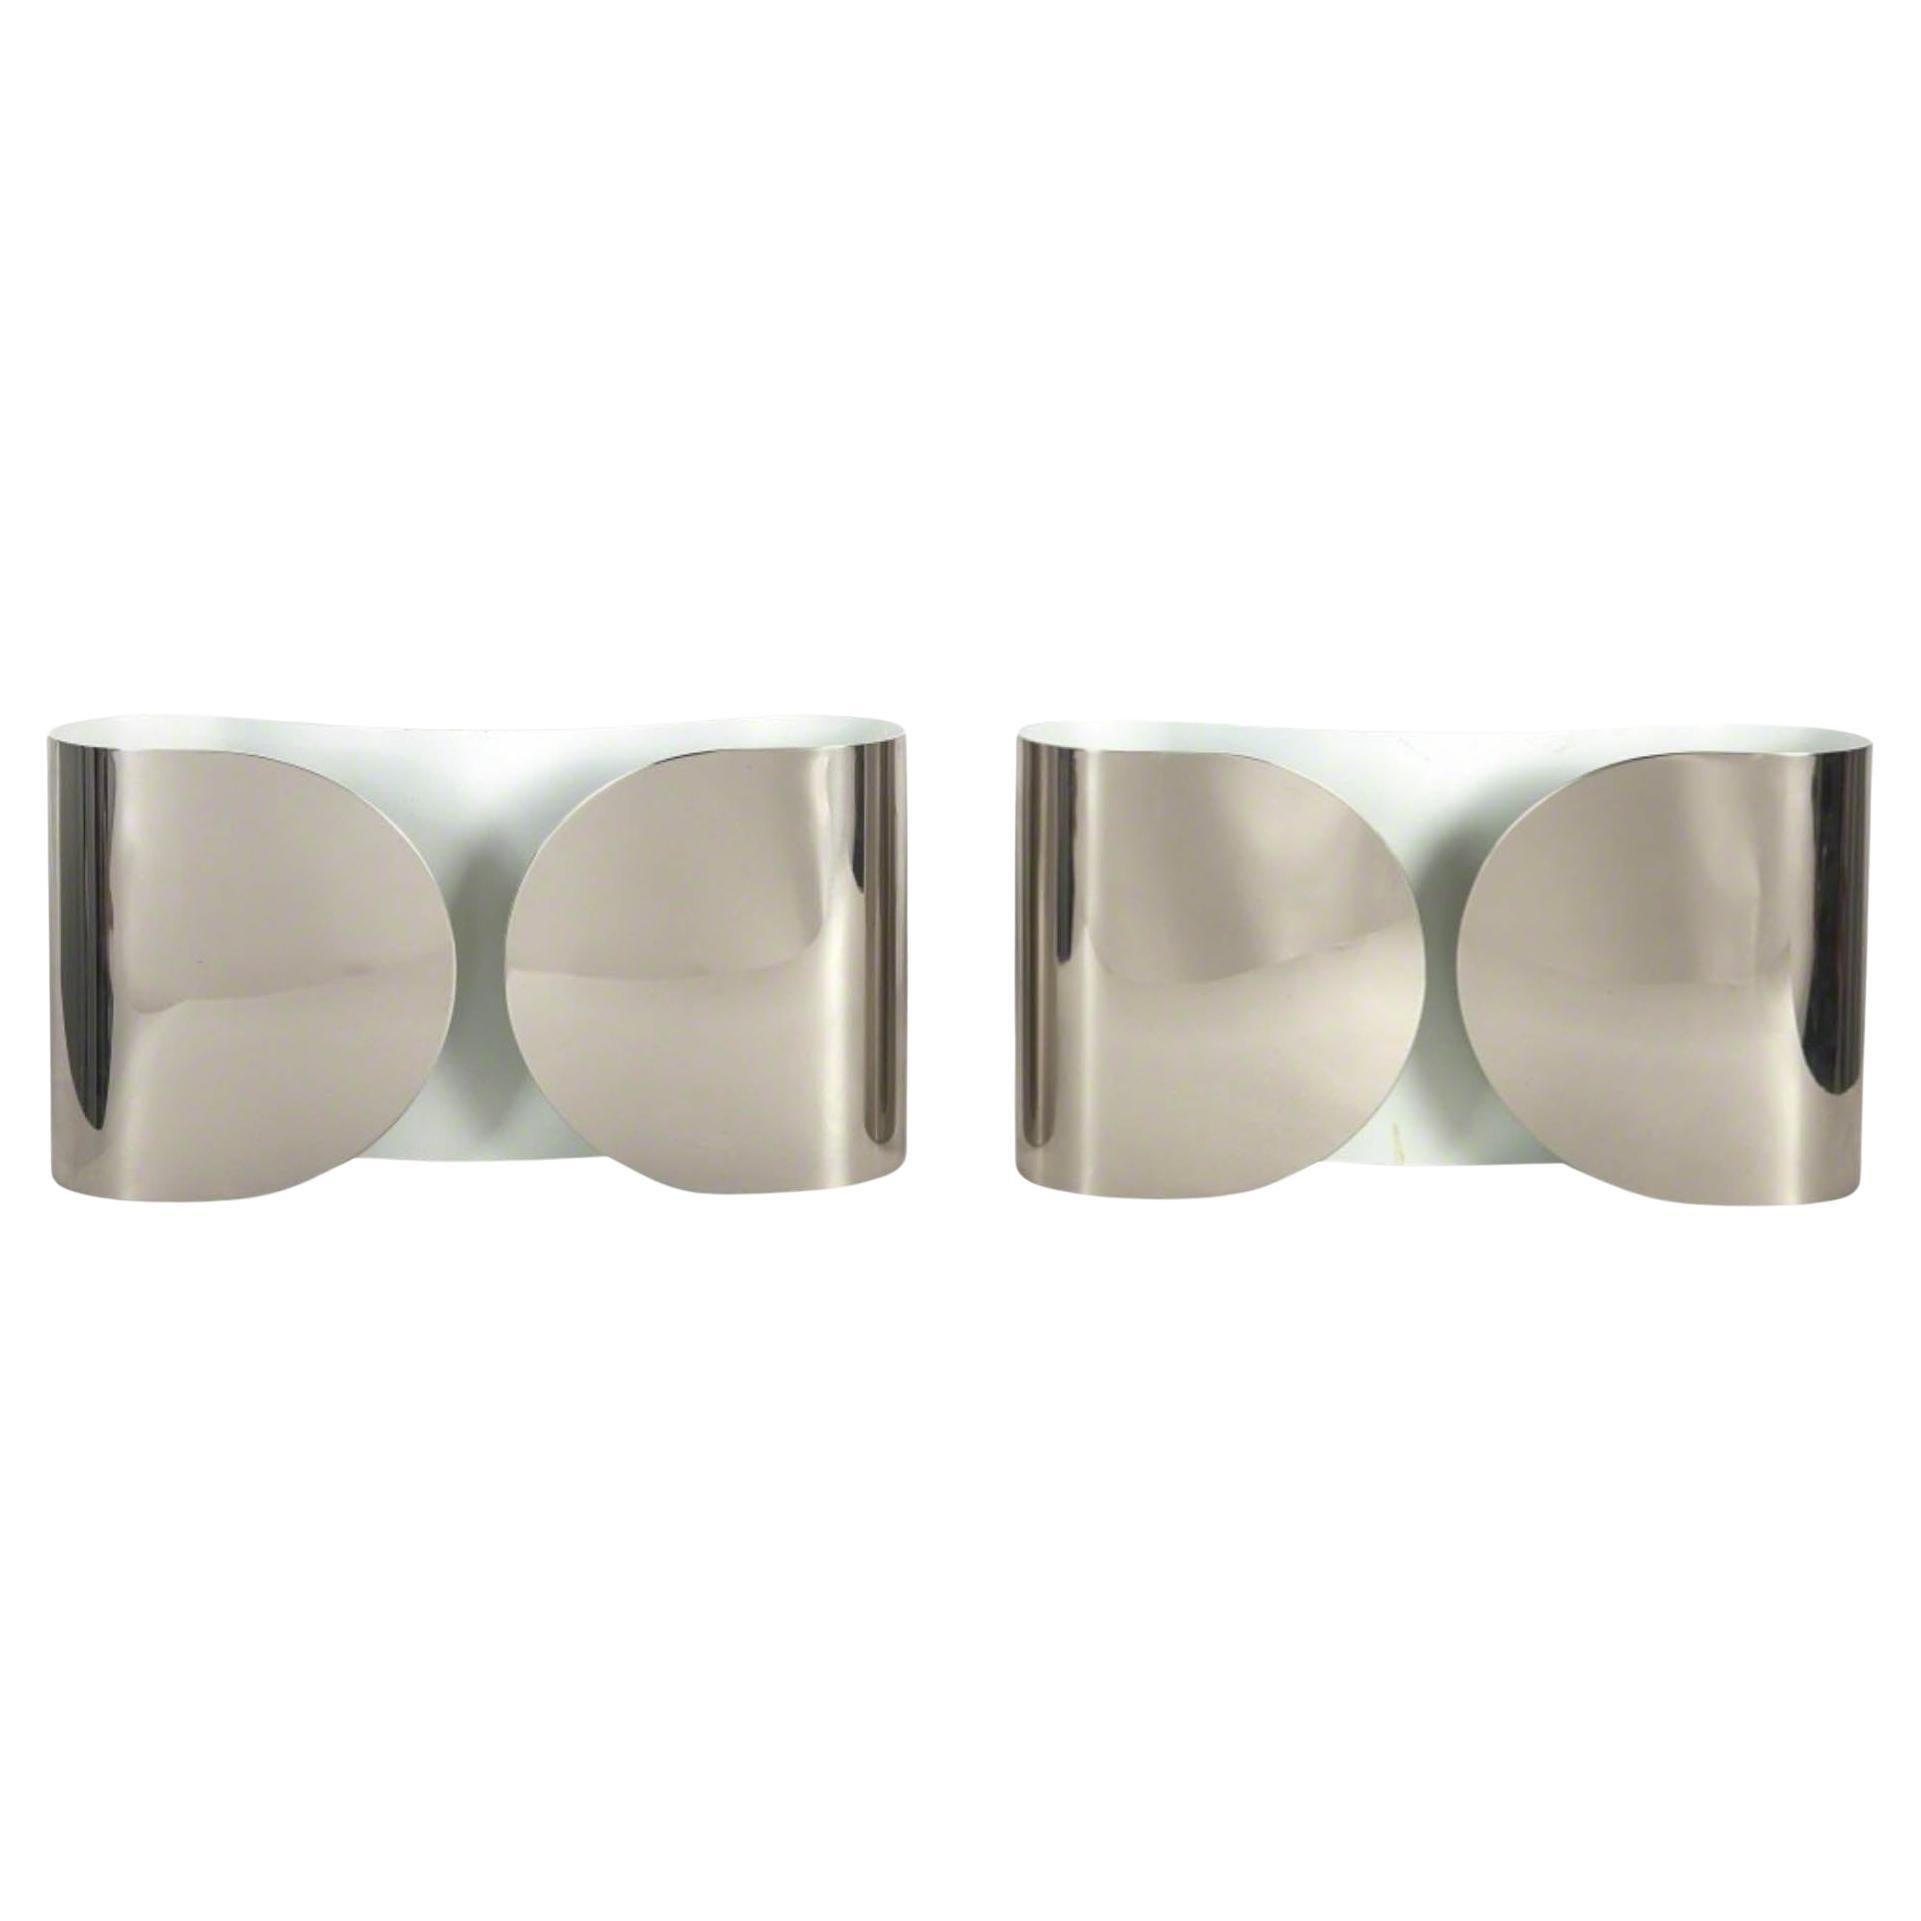 Tobia Scarpa for Flos Pair of "Foglio" Wall Lamps, Italy 1960s